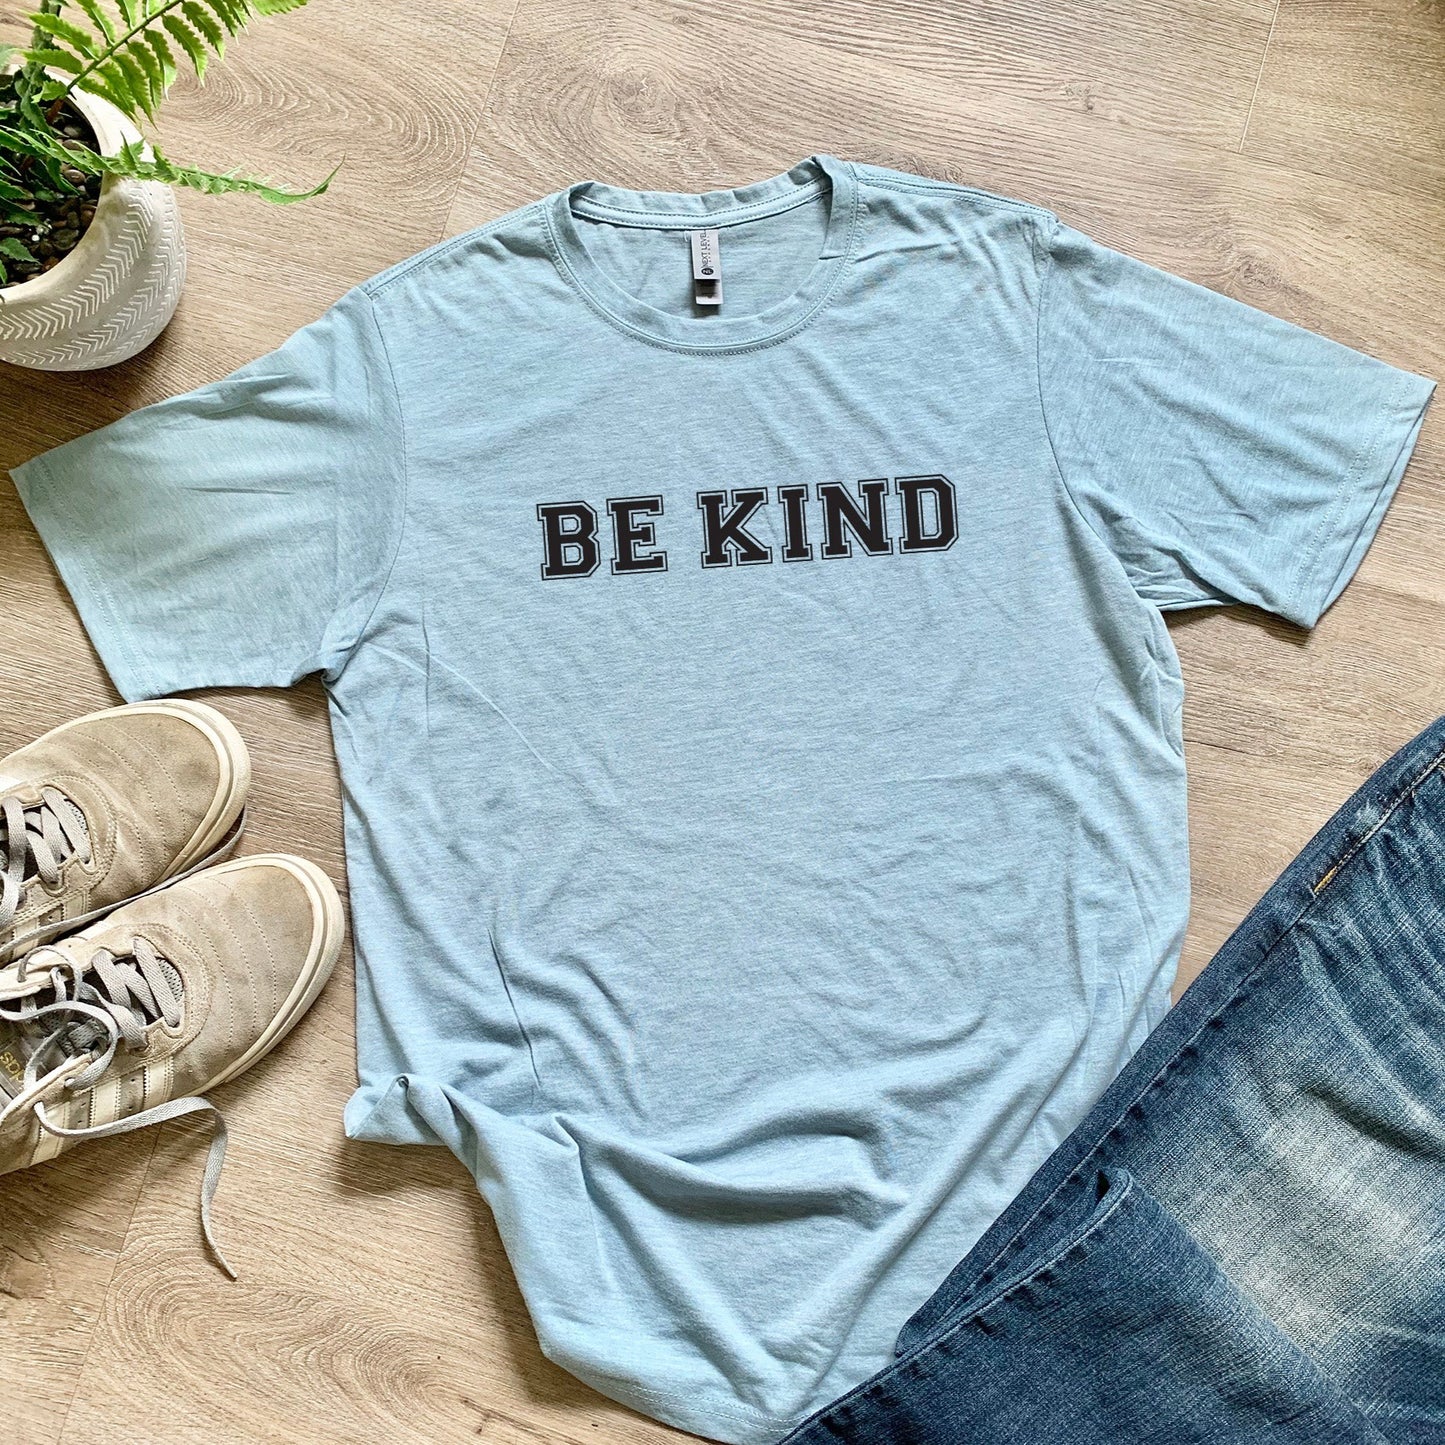 Be Kind - Feel Good Collection - Men's / Unisex Tee - Stonewash Blue or Sage